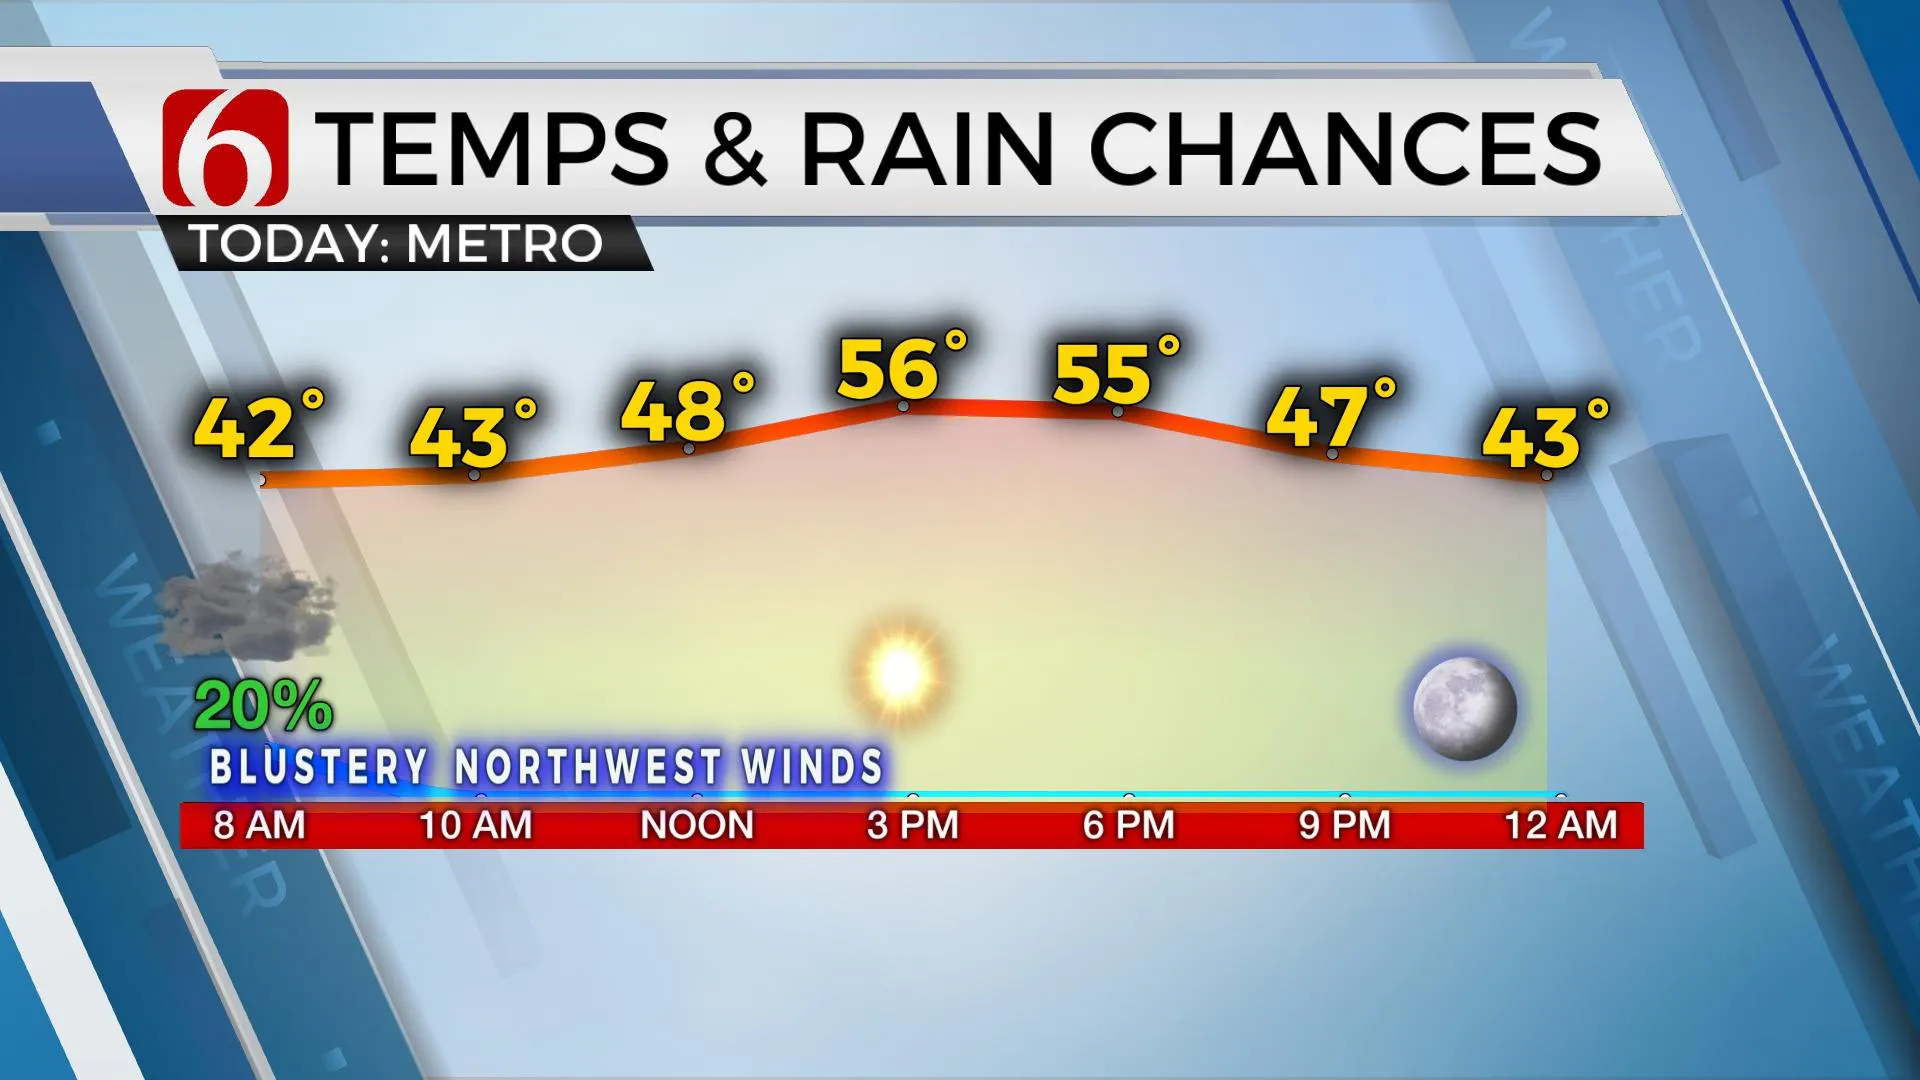 Temps and rain chances in Tulsa on Friday.